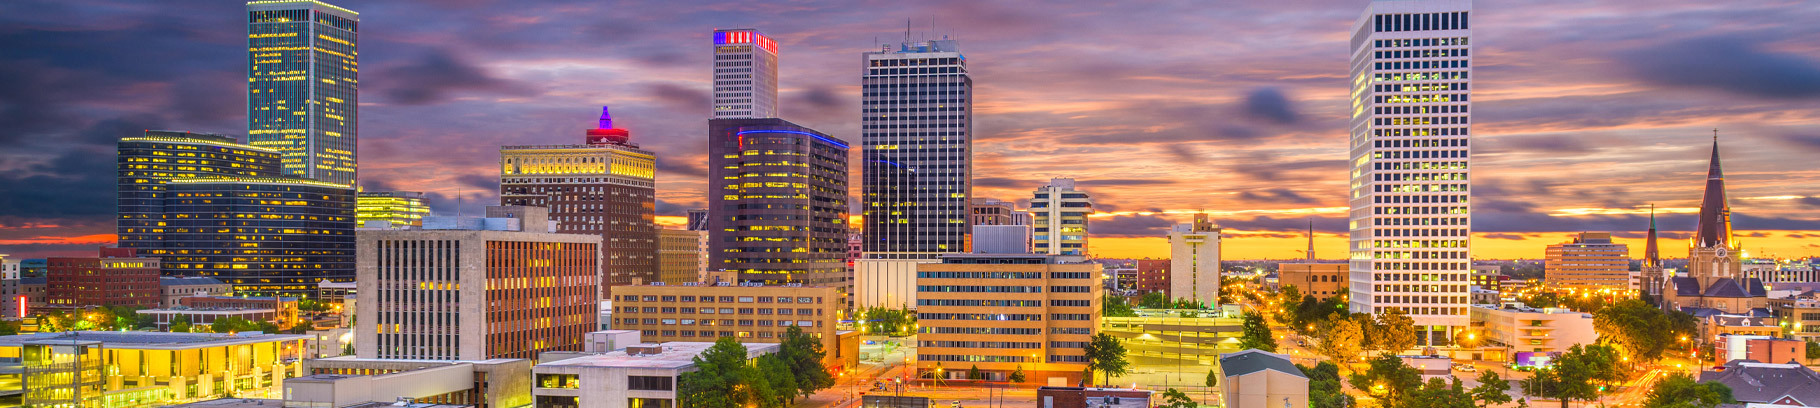 A view of Tulsa's downtown skyline at sunset